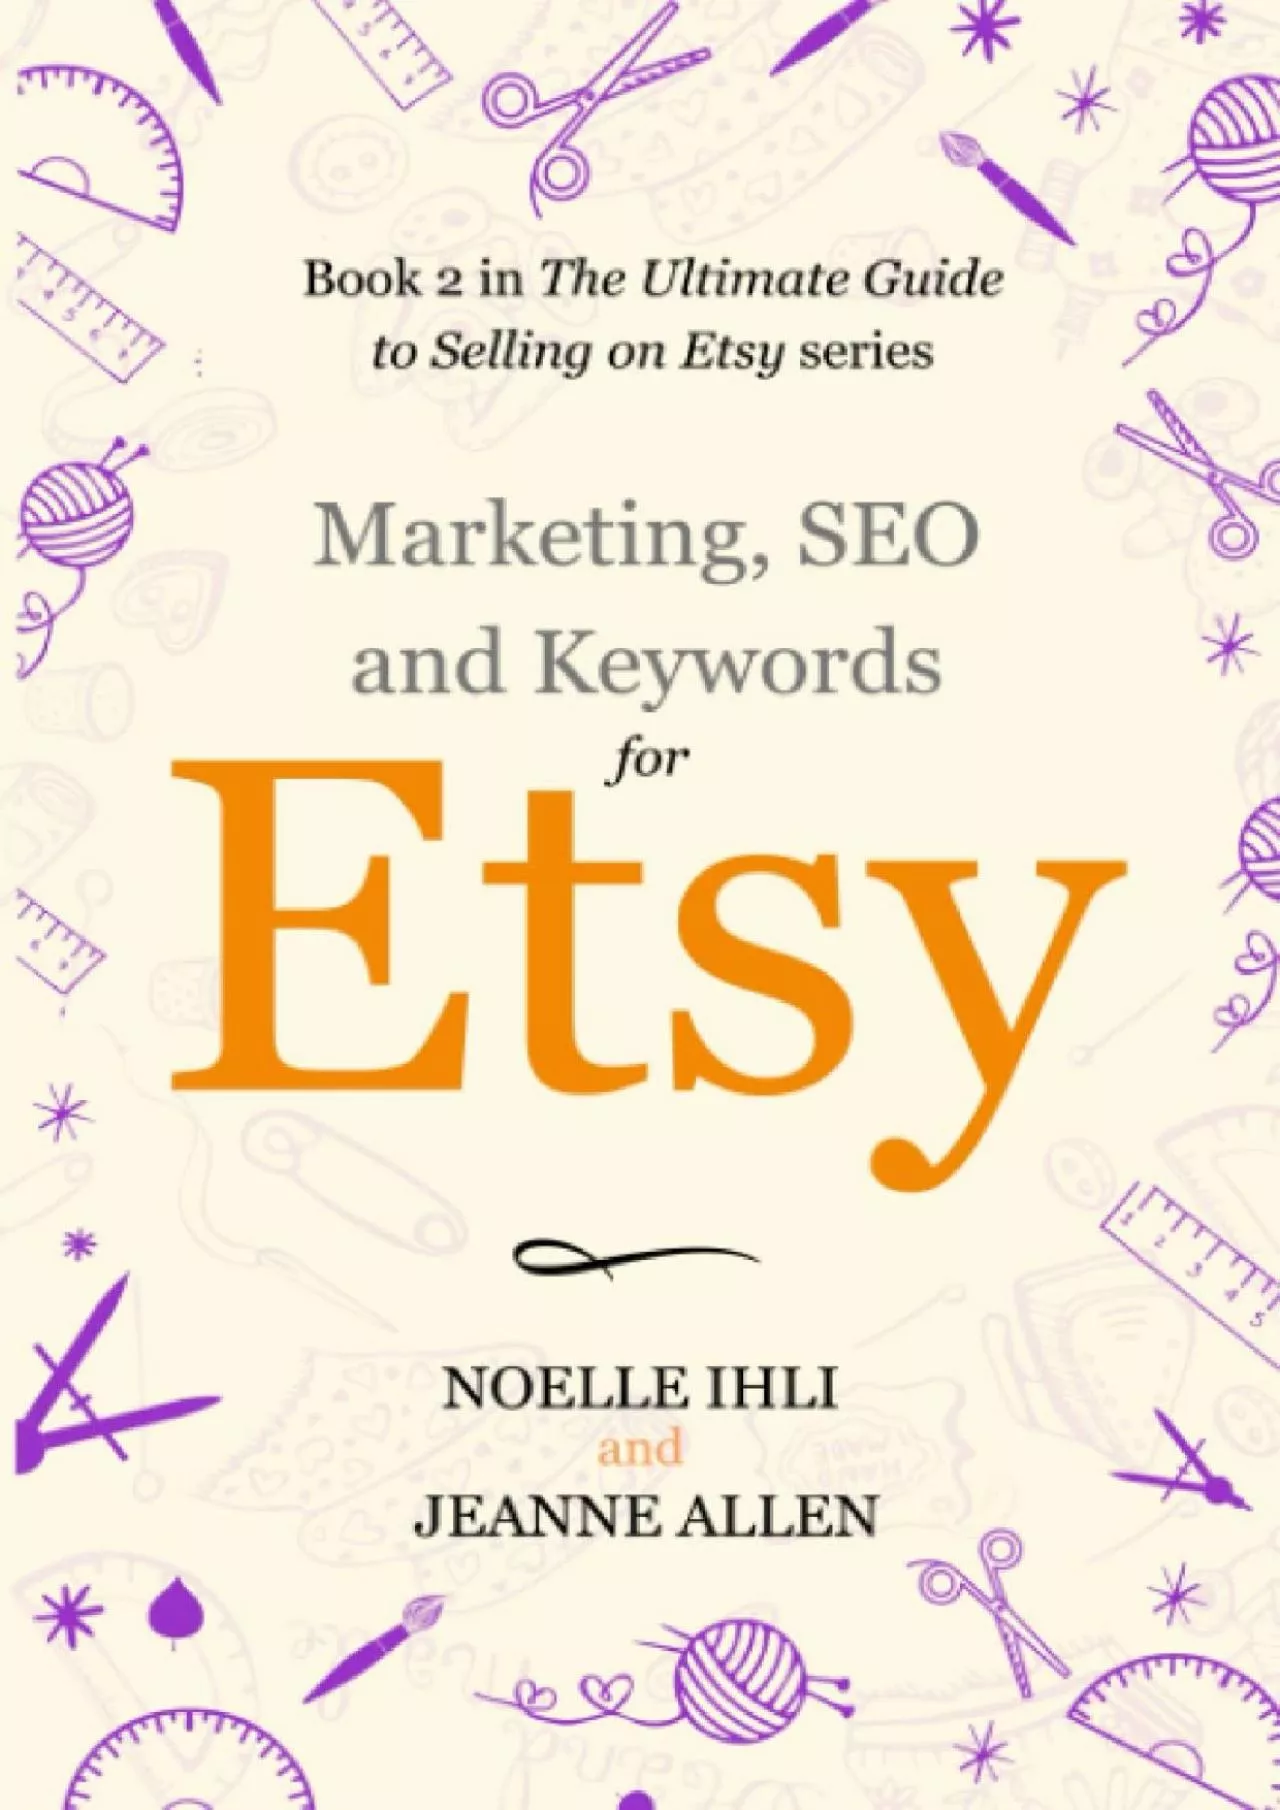 Marketing, Keywords, and SEO for Etsy: Book 2 in The Ultimate Guide to Selling on Etsy